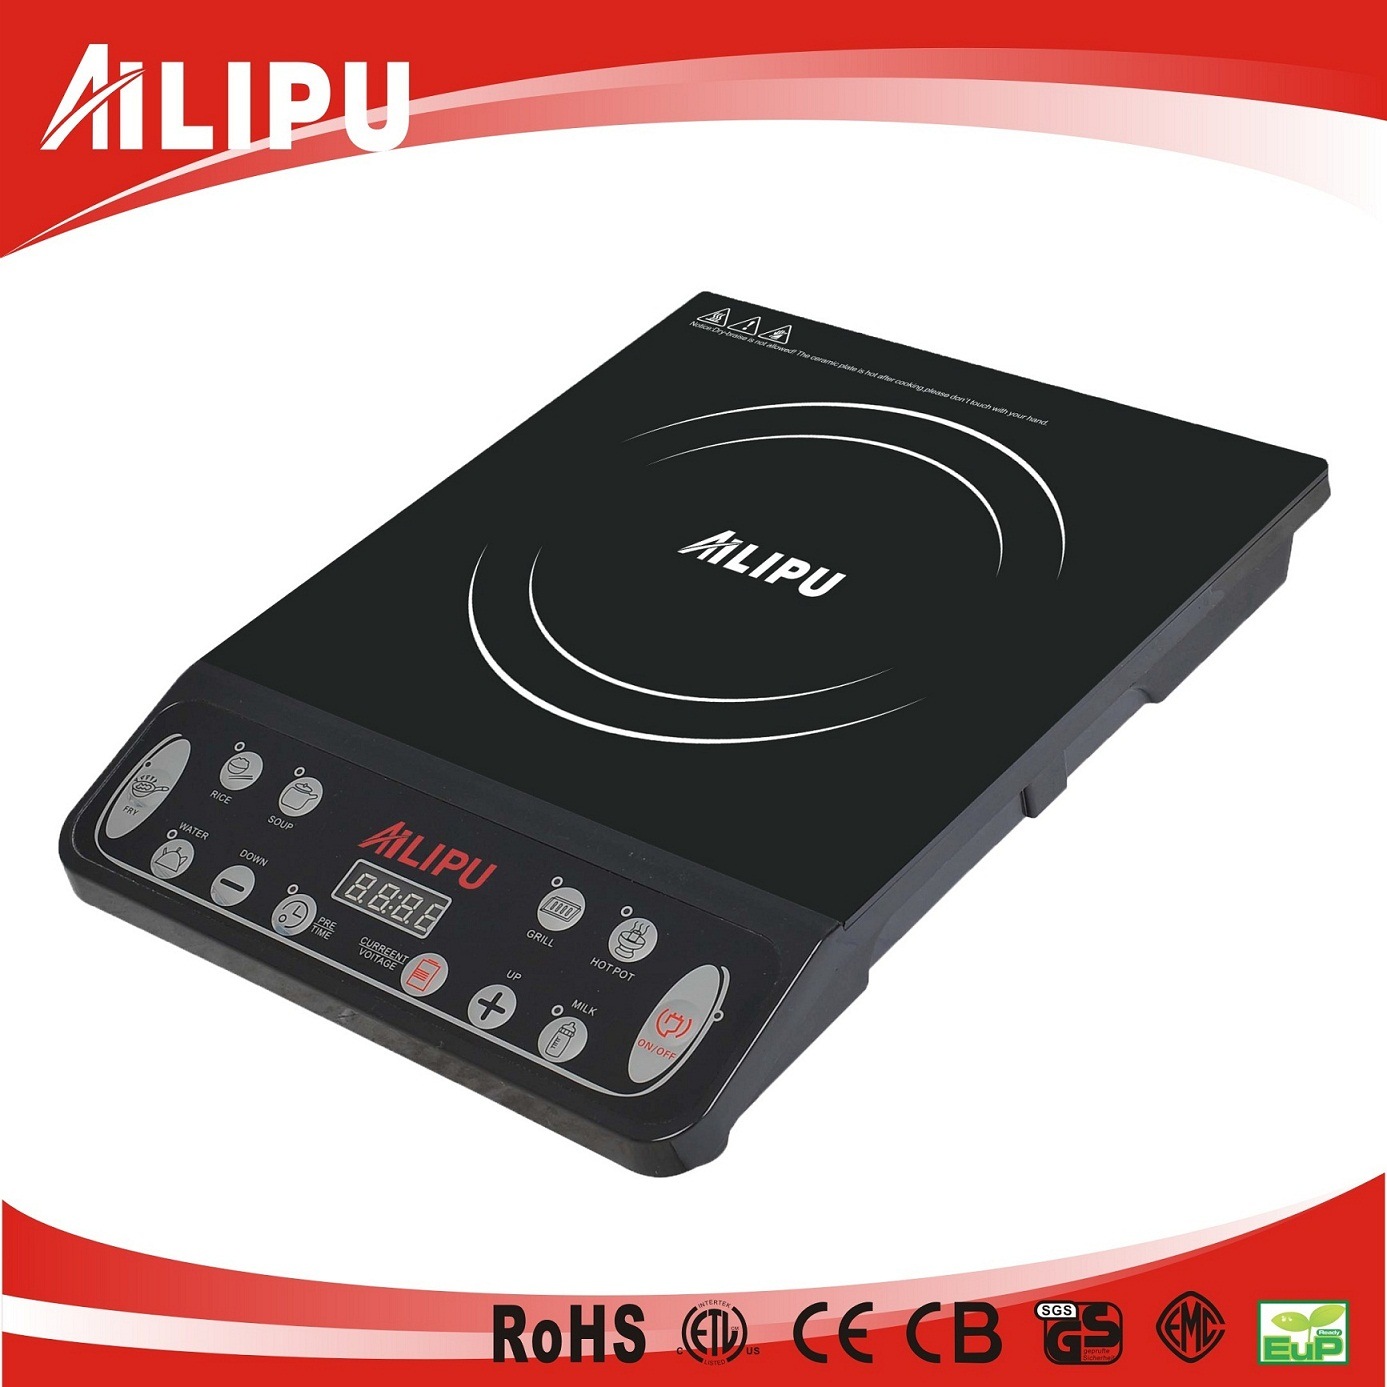 2015 Home Appliance, Kitchenware, Induction Heater, Stove, Hot Pot (SM-A29)